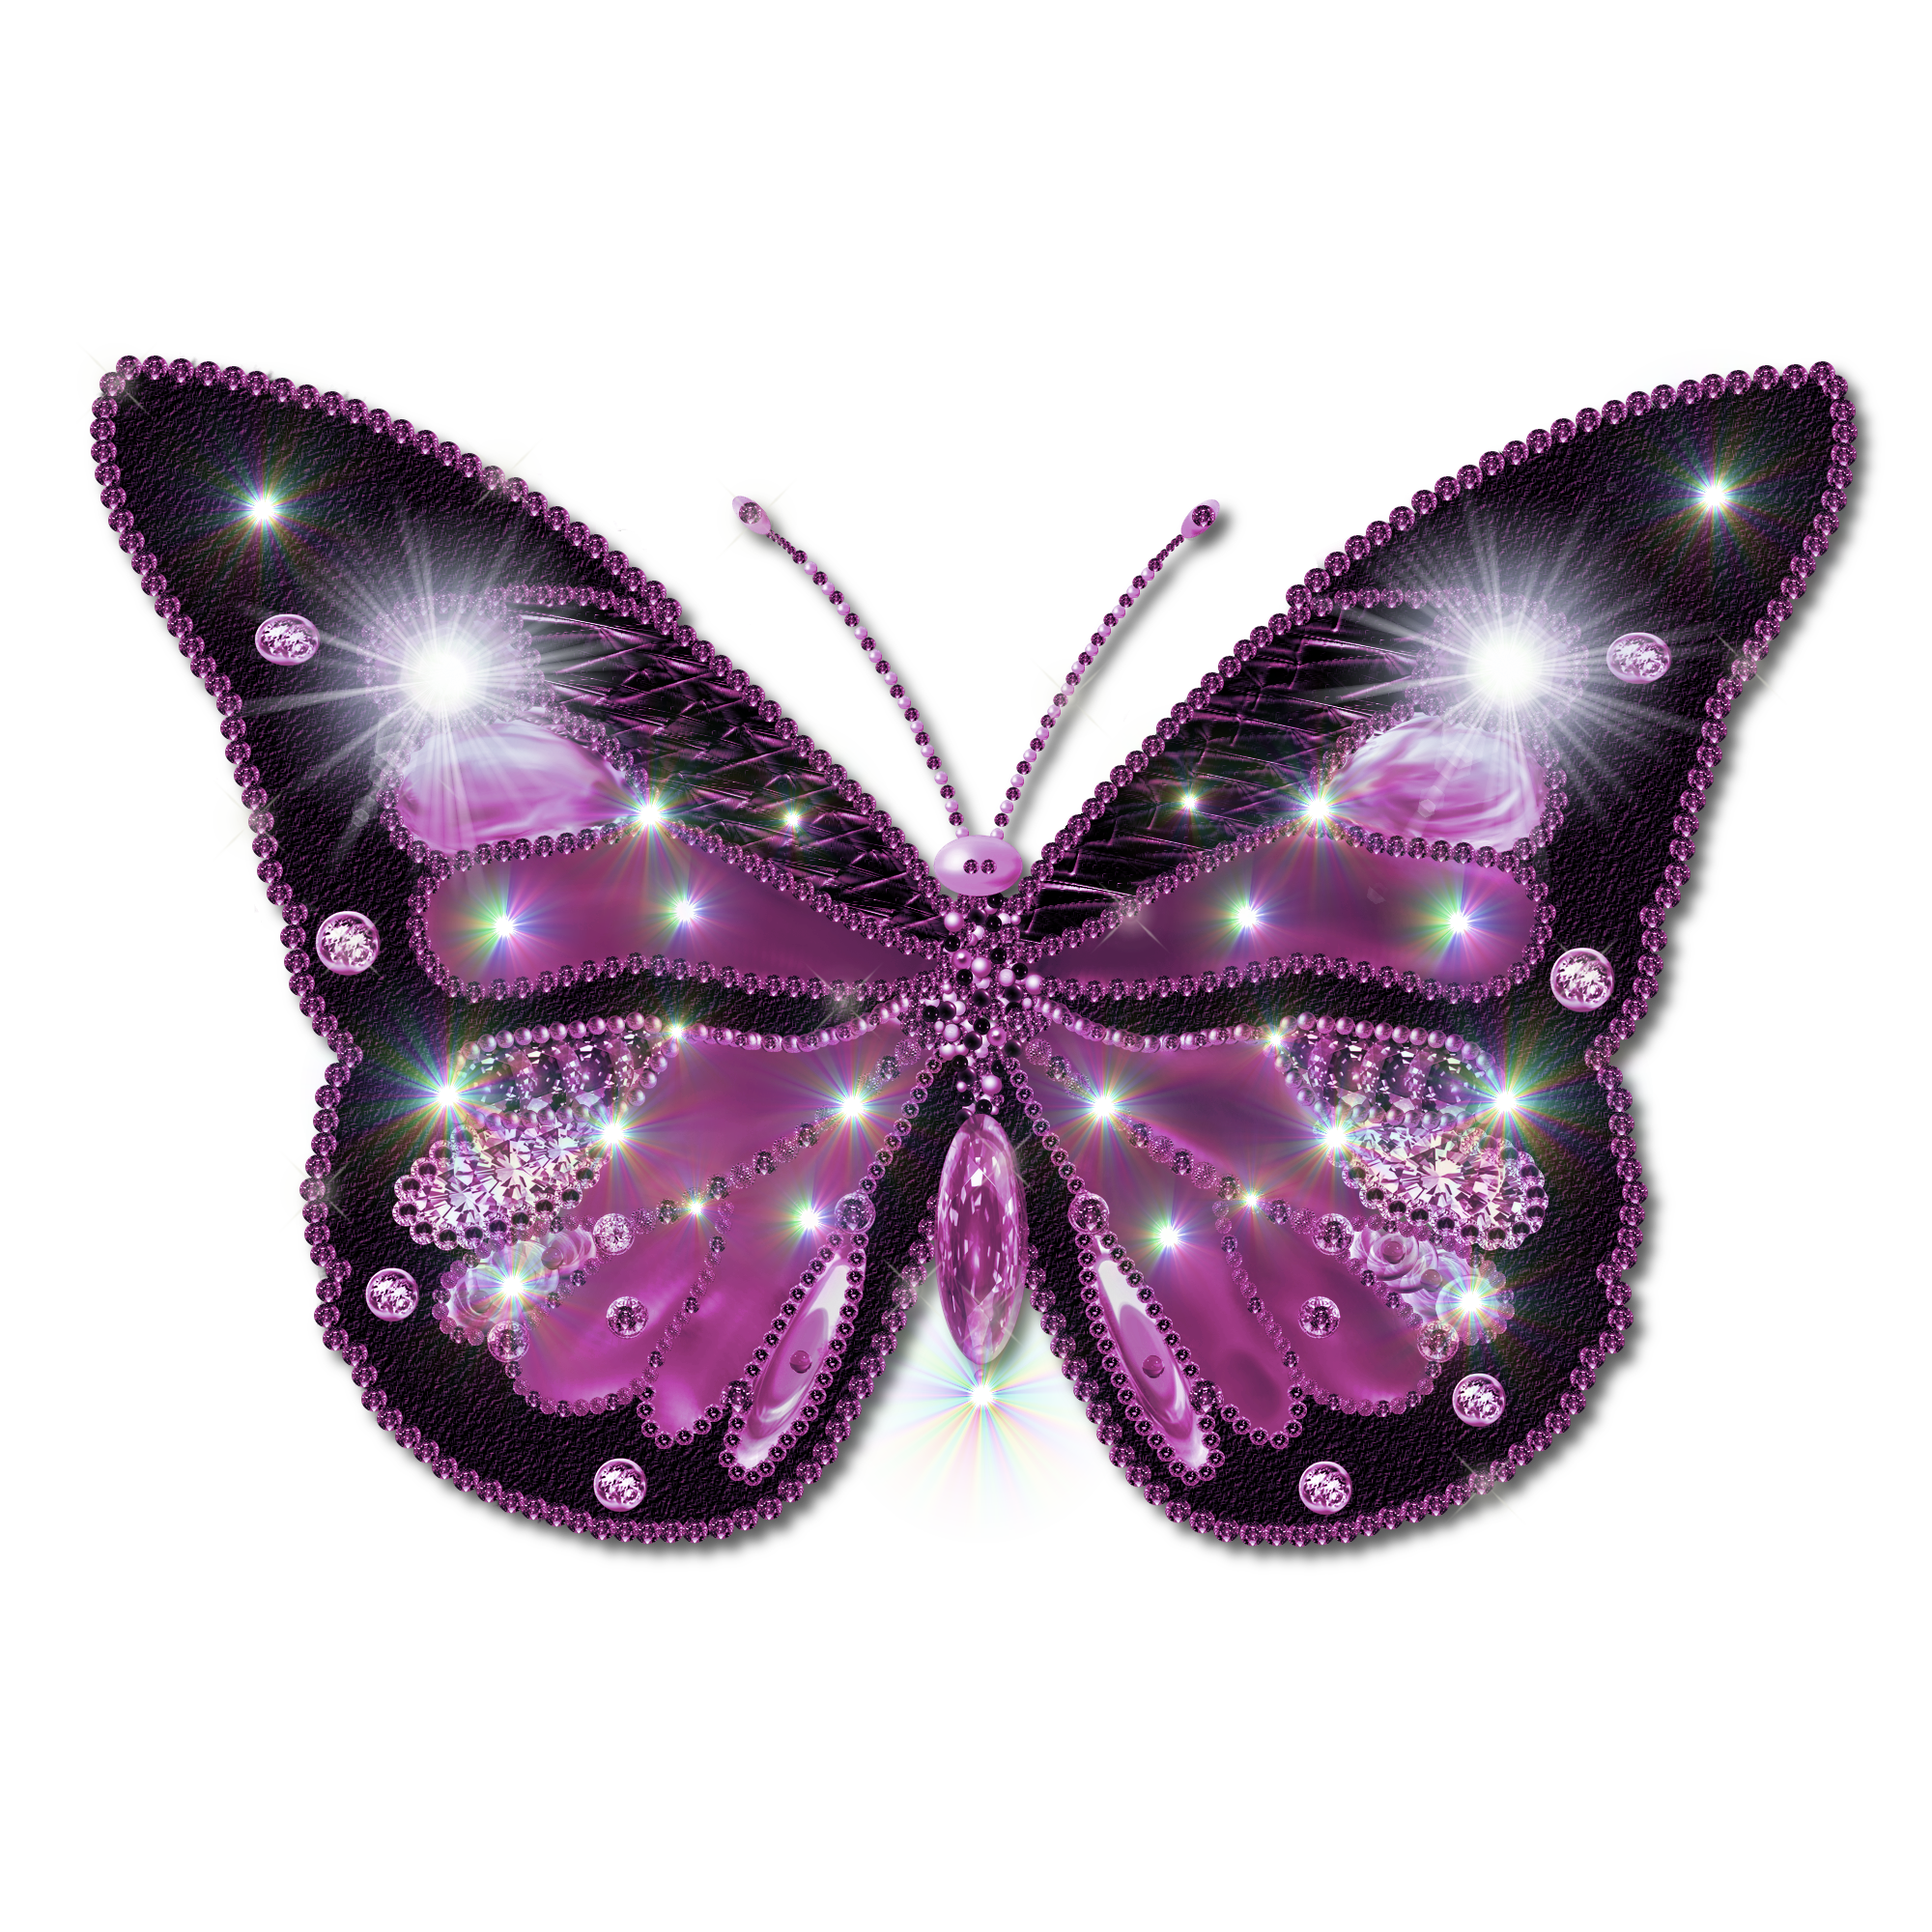 Butterfly PNG image transparent image download, size: 2000x2000px